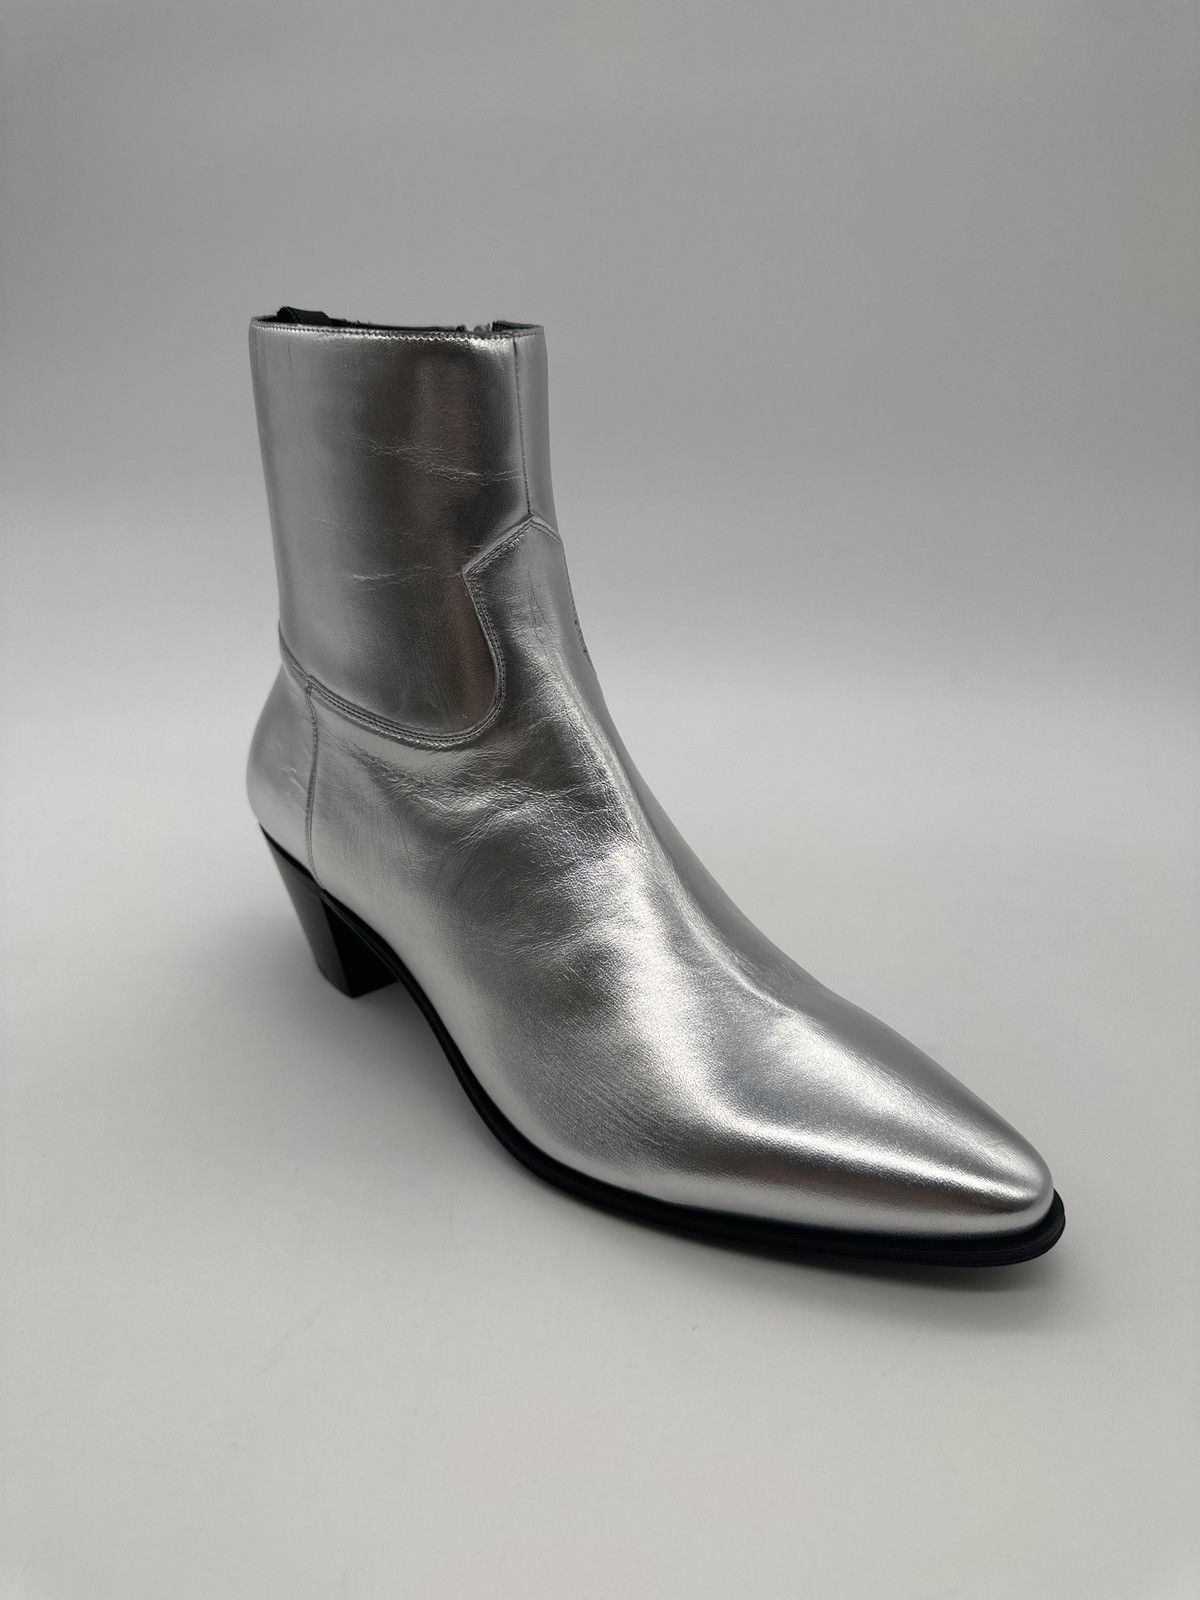 Celine Camperos silver boots | Grailed